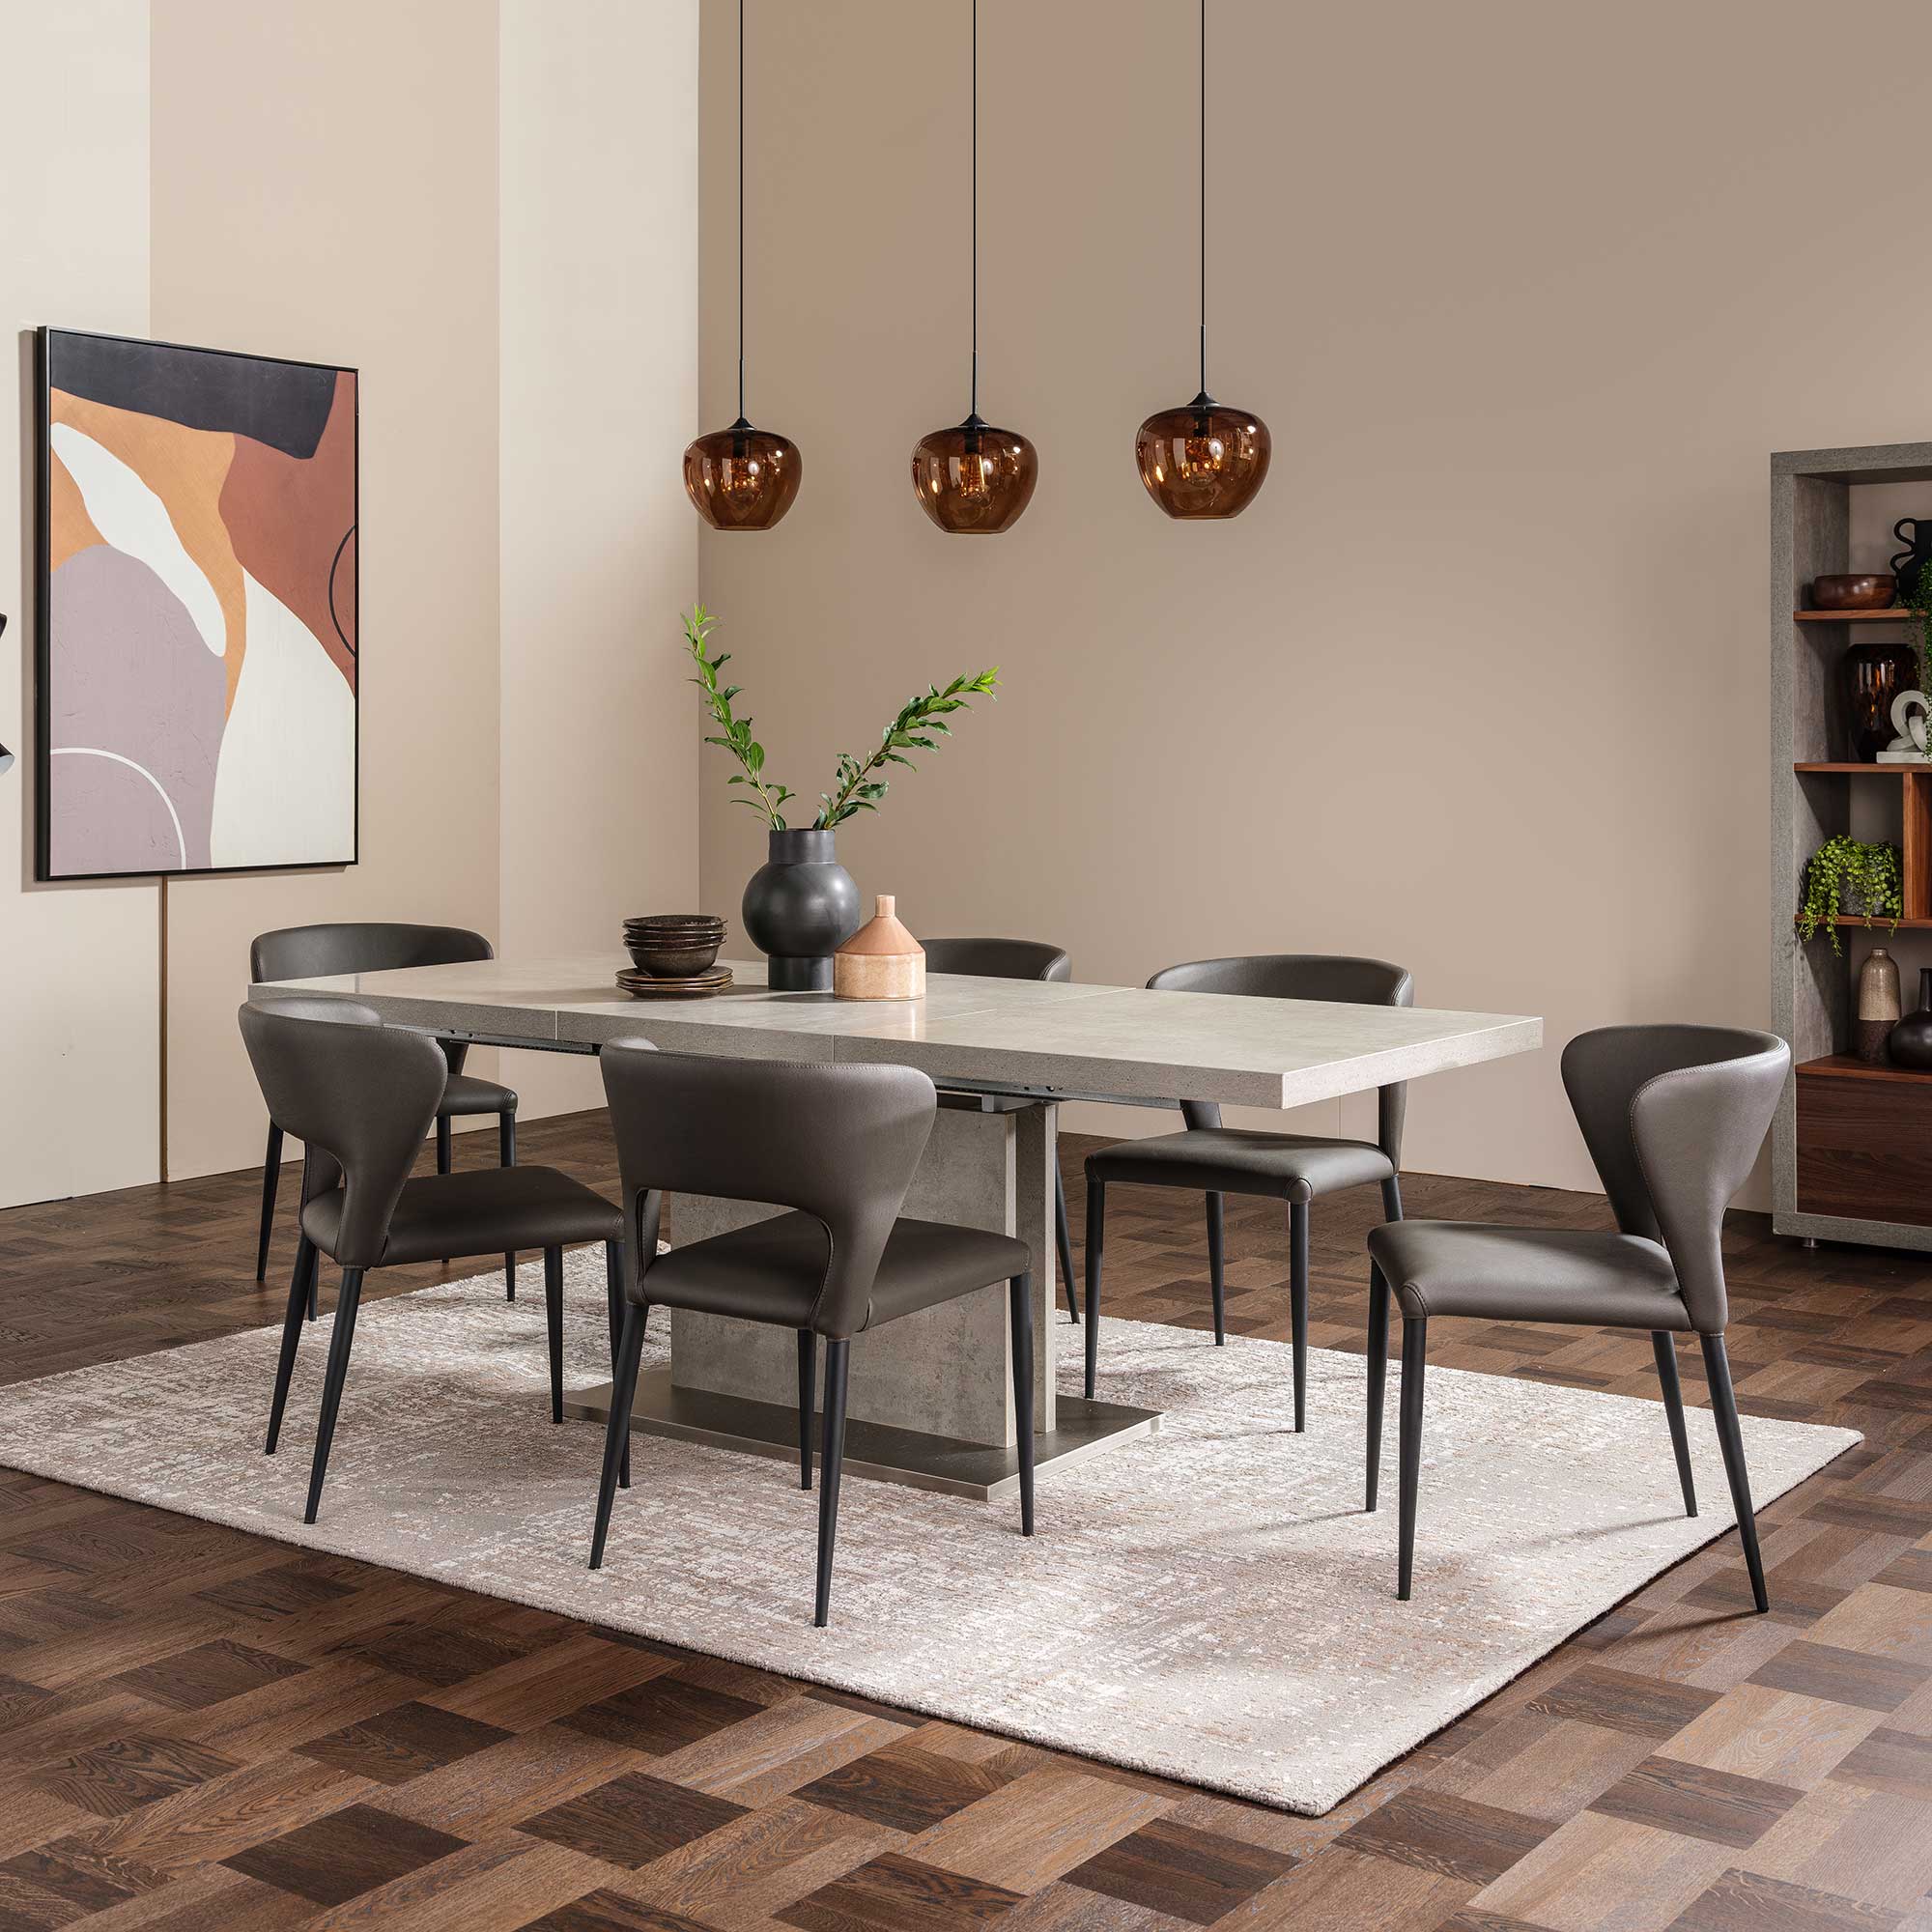 Halmstad 160cm Extended Dining Table+6 Rin Chairs, Grey | Barker & Stonehouse